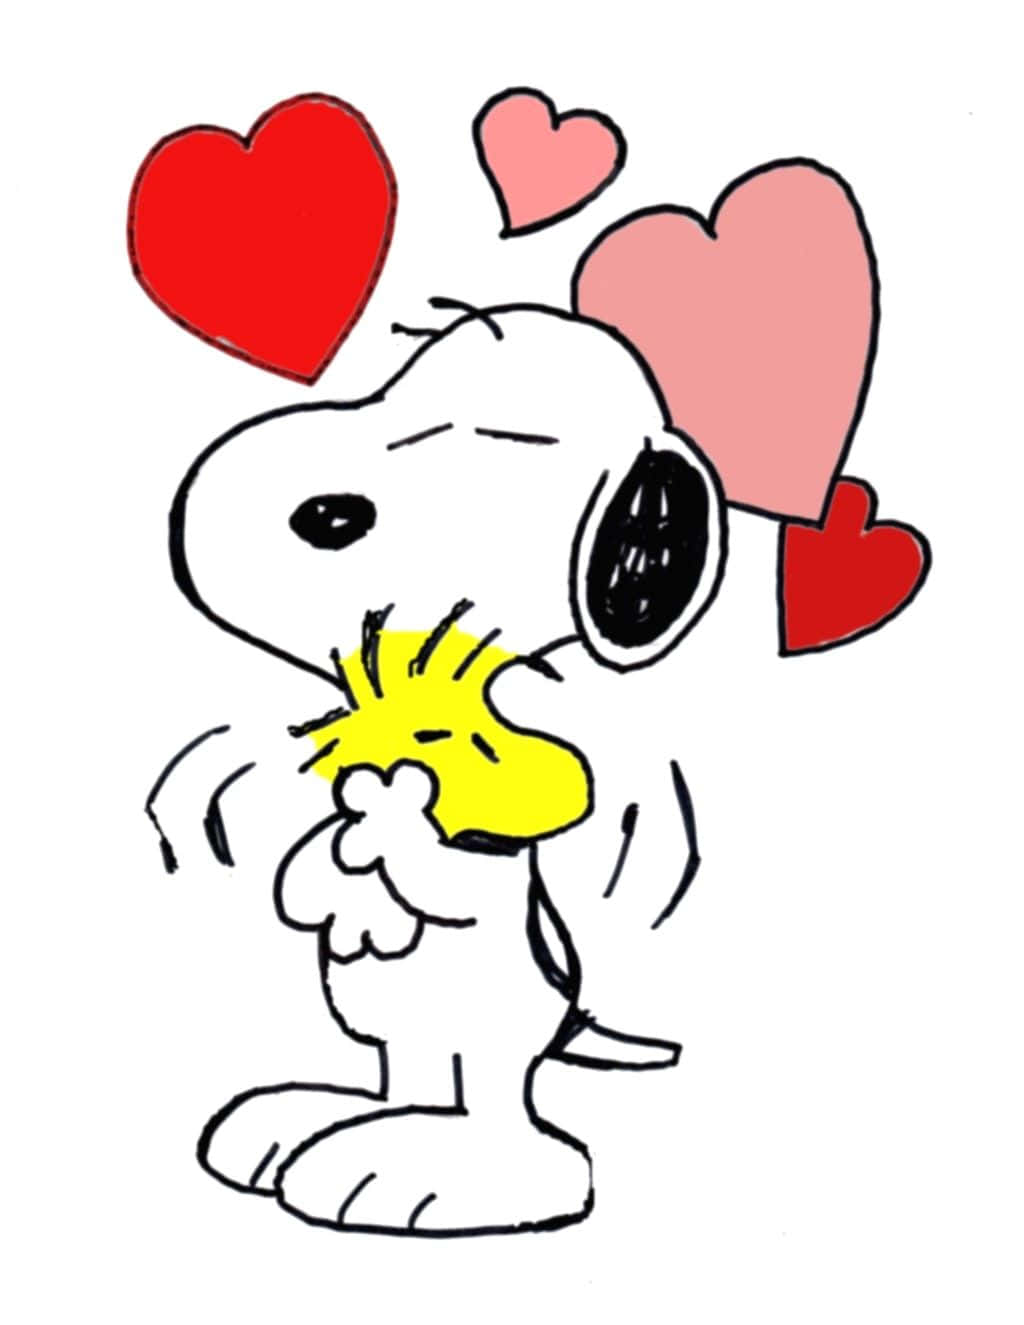 Snoopy Valentine Hugging Woodstock And Hearts Wallpaper